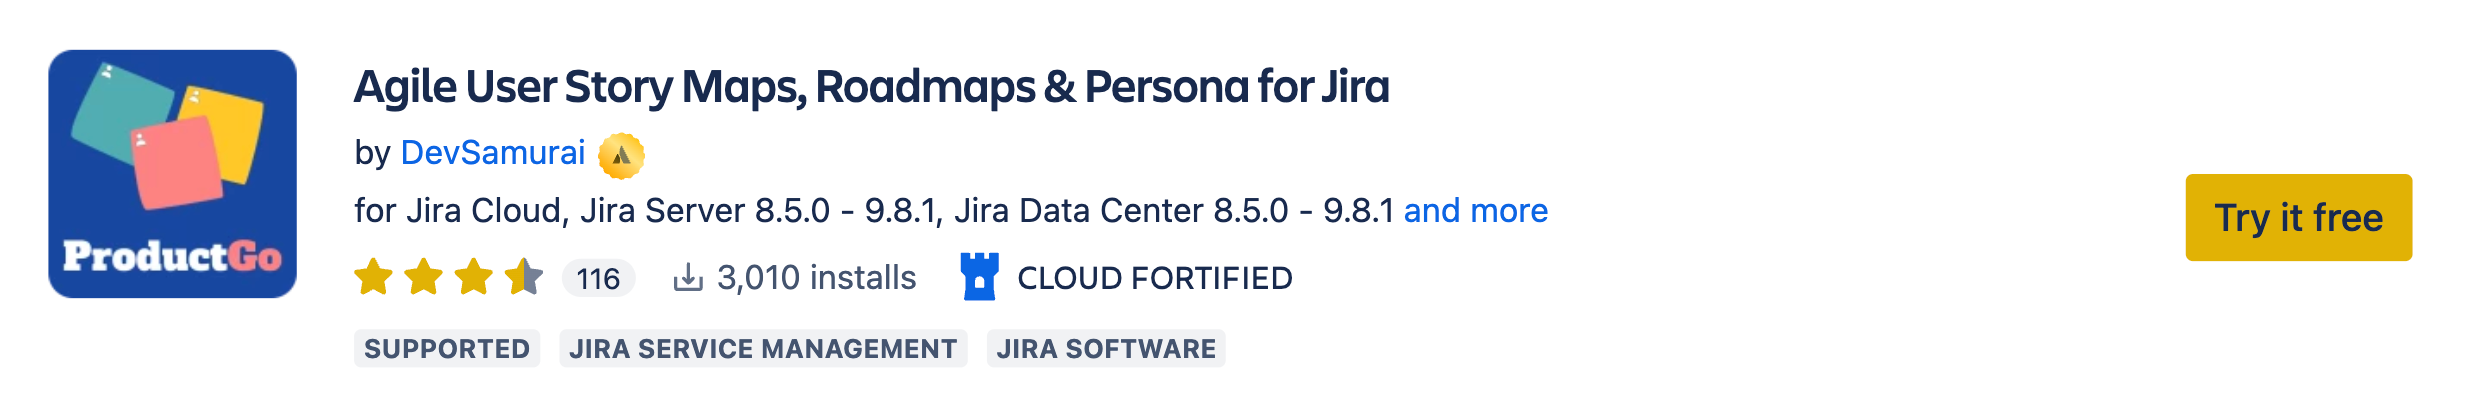 ProductGo for Jira - User Story Map